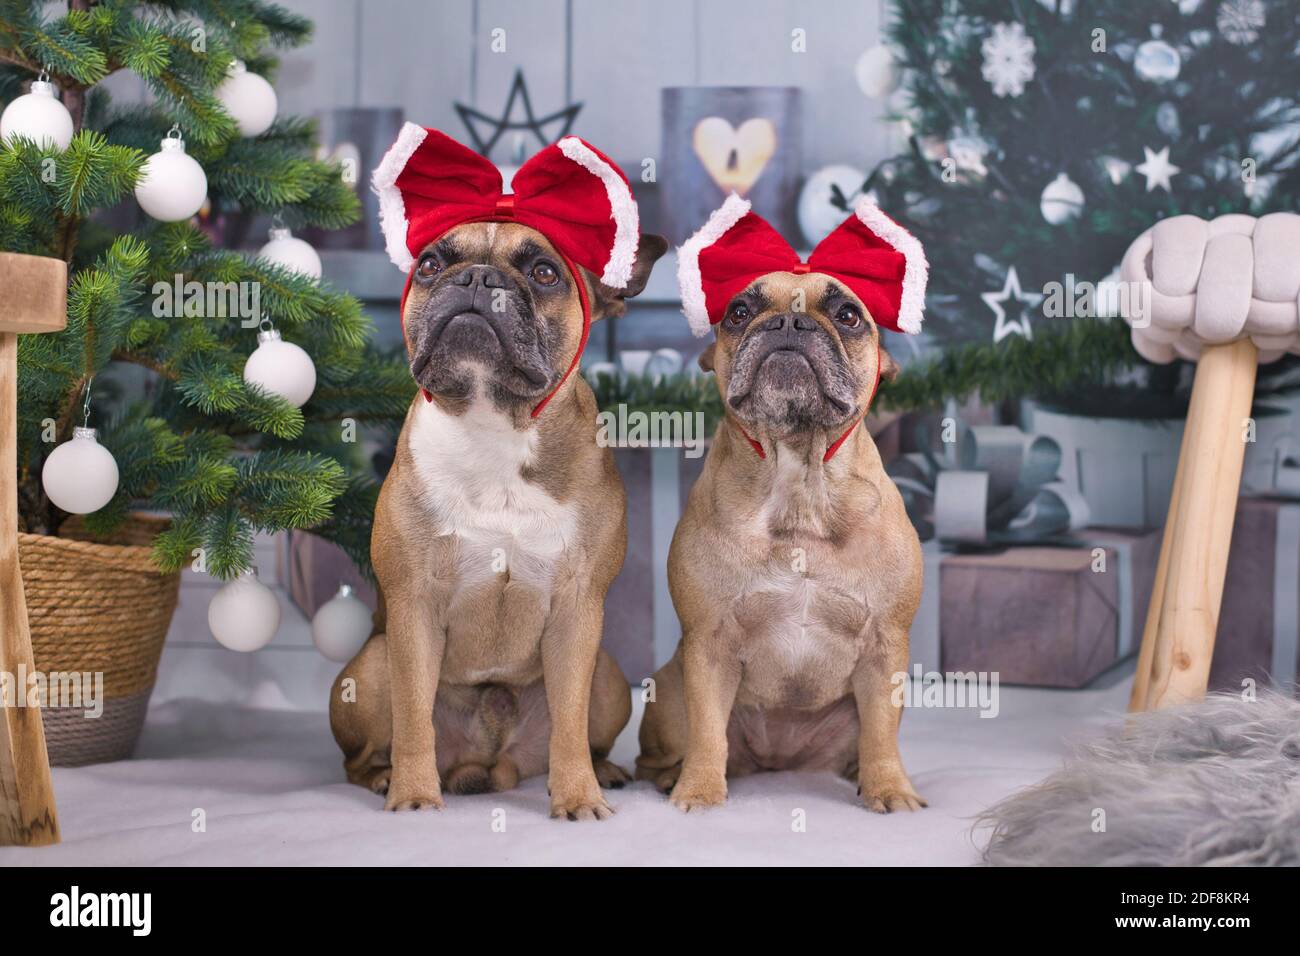 Pair of French Bulldog dogs dressed up with festive red ribbons on heads sitting between Christmas tree with baubles and gift boxes in blurry backgrou Stock Photo